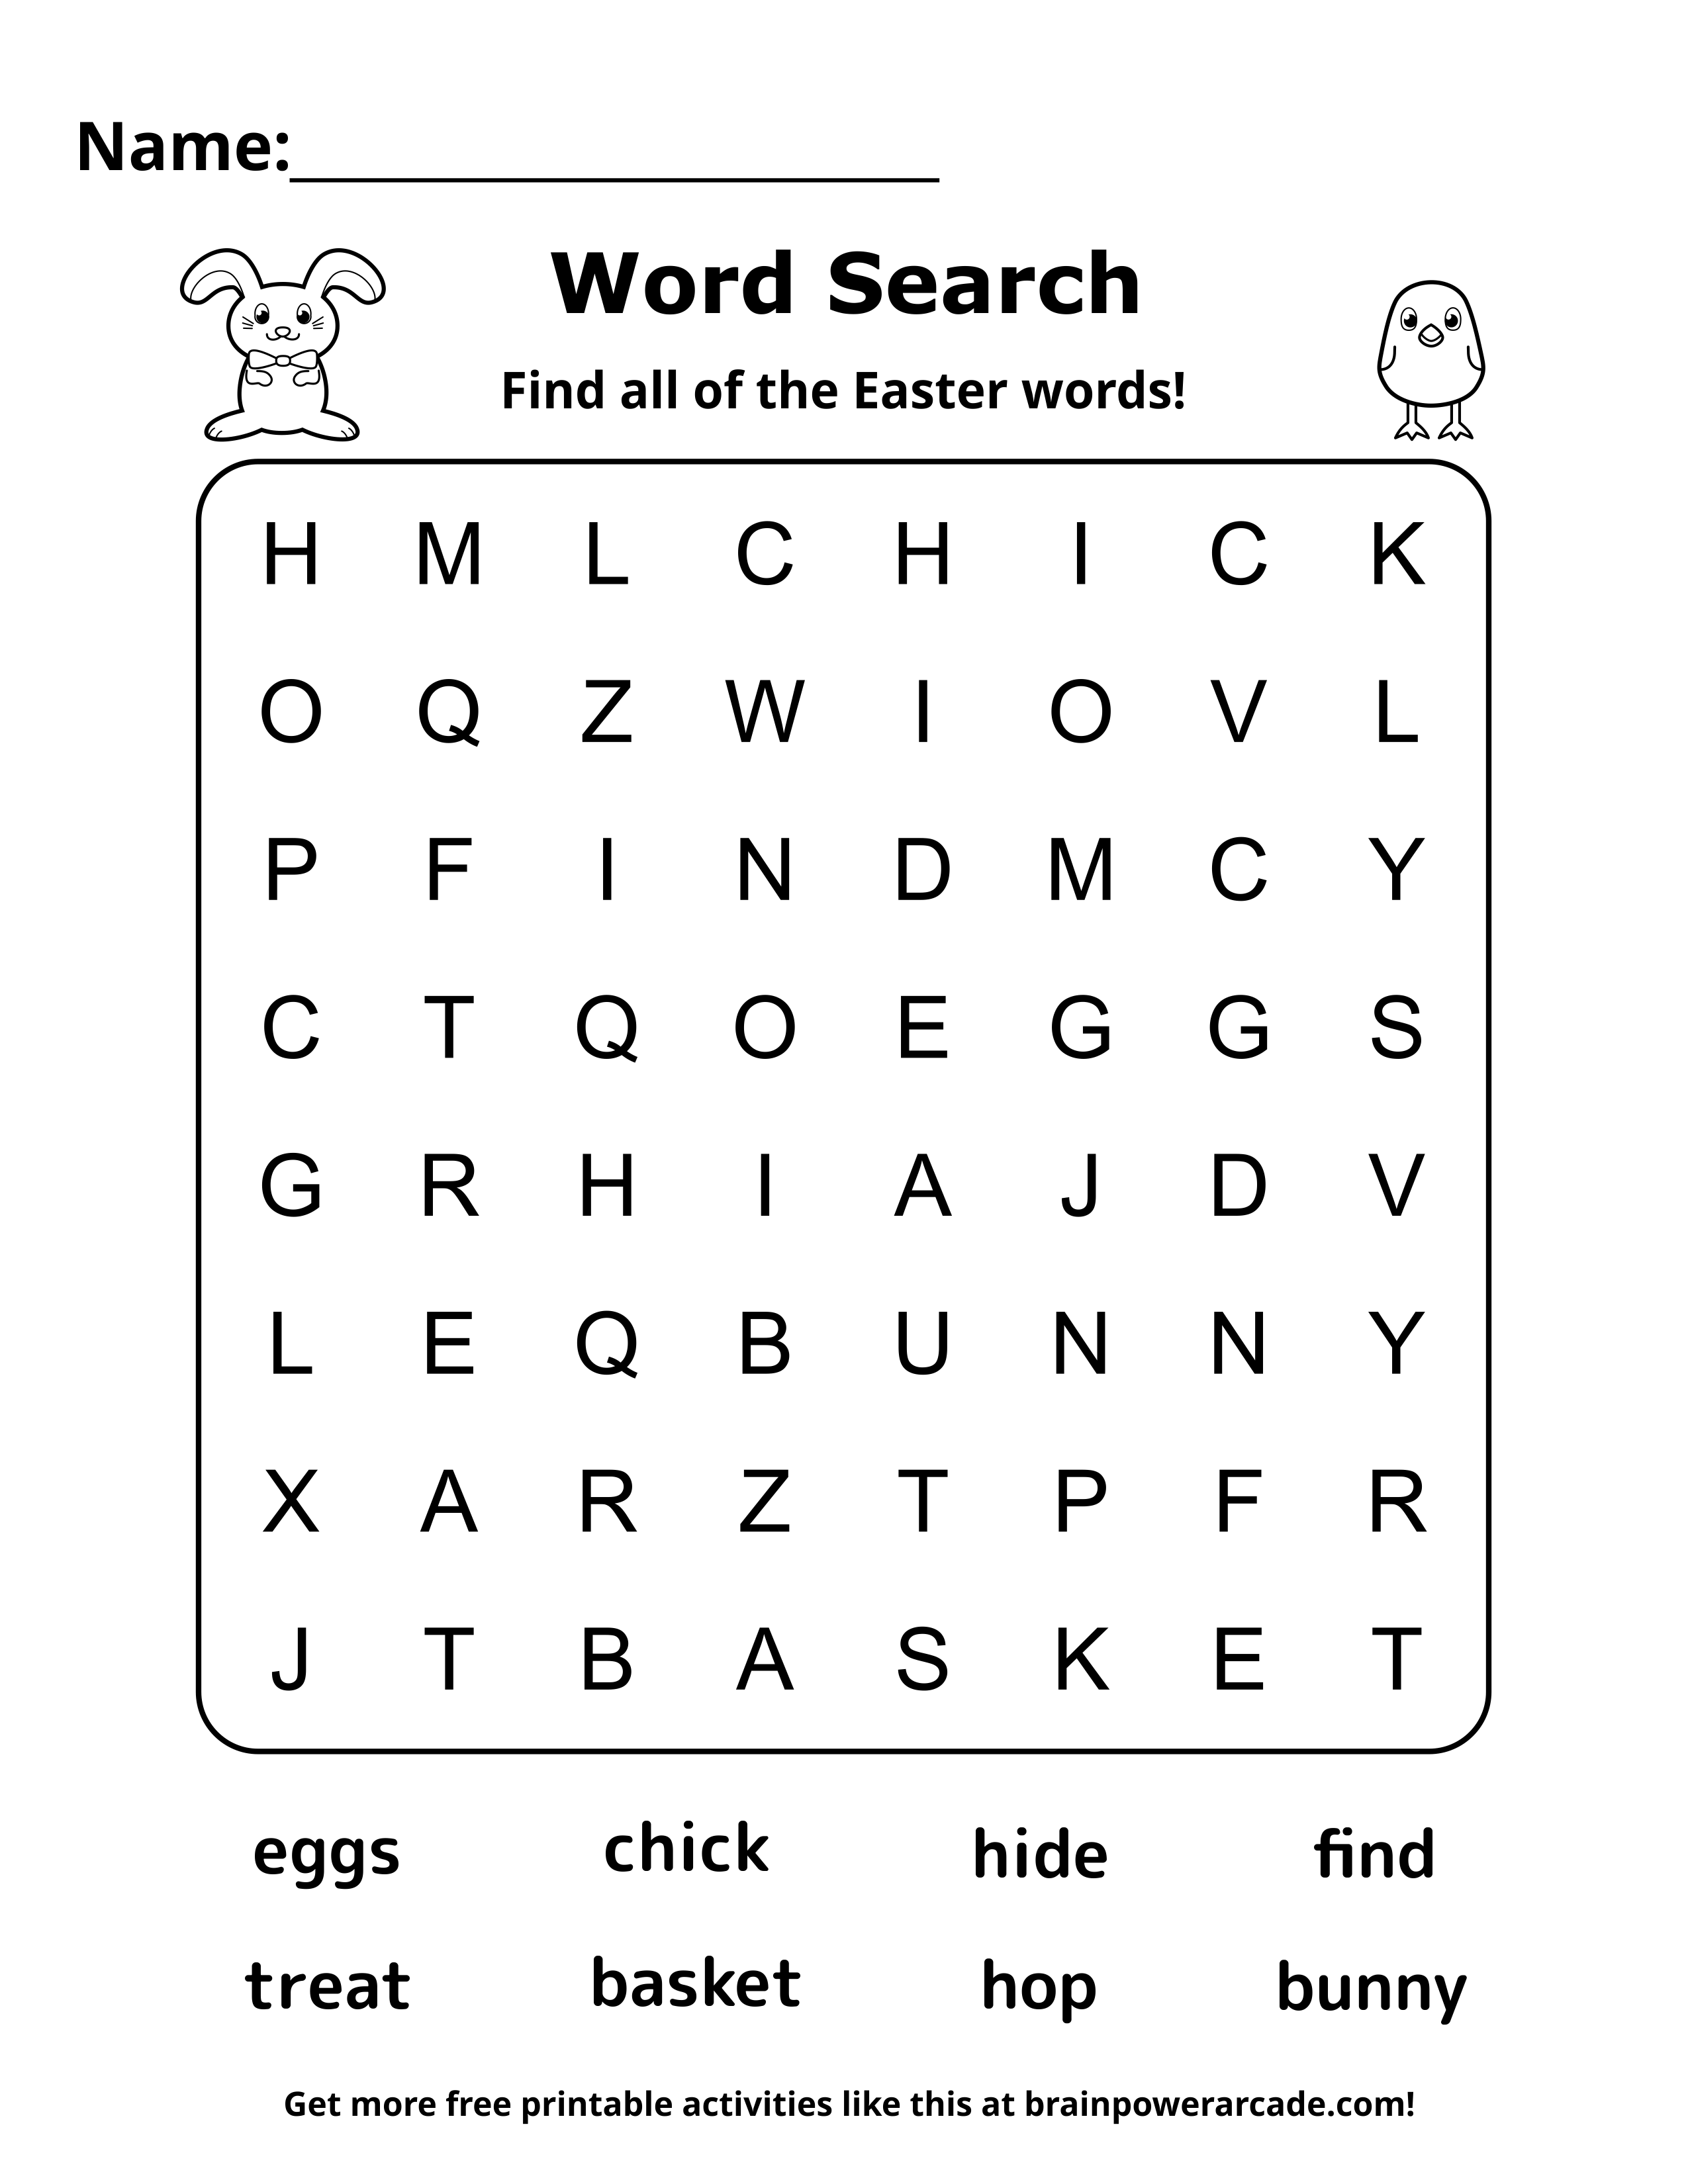 Find the Easter Words